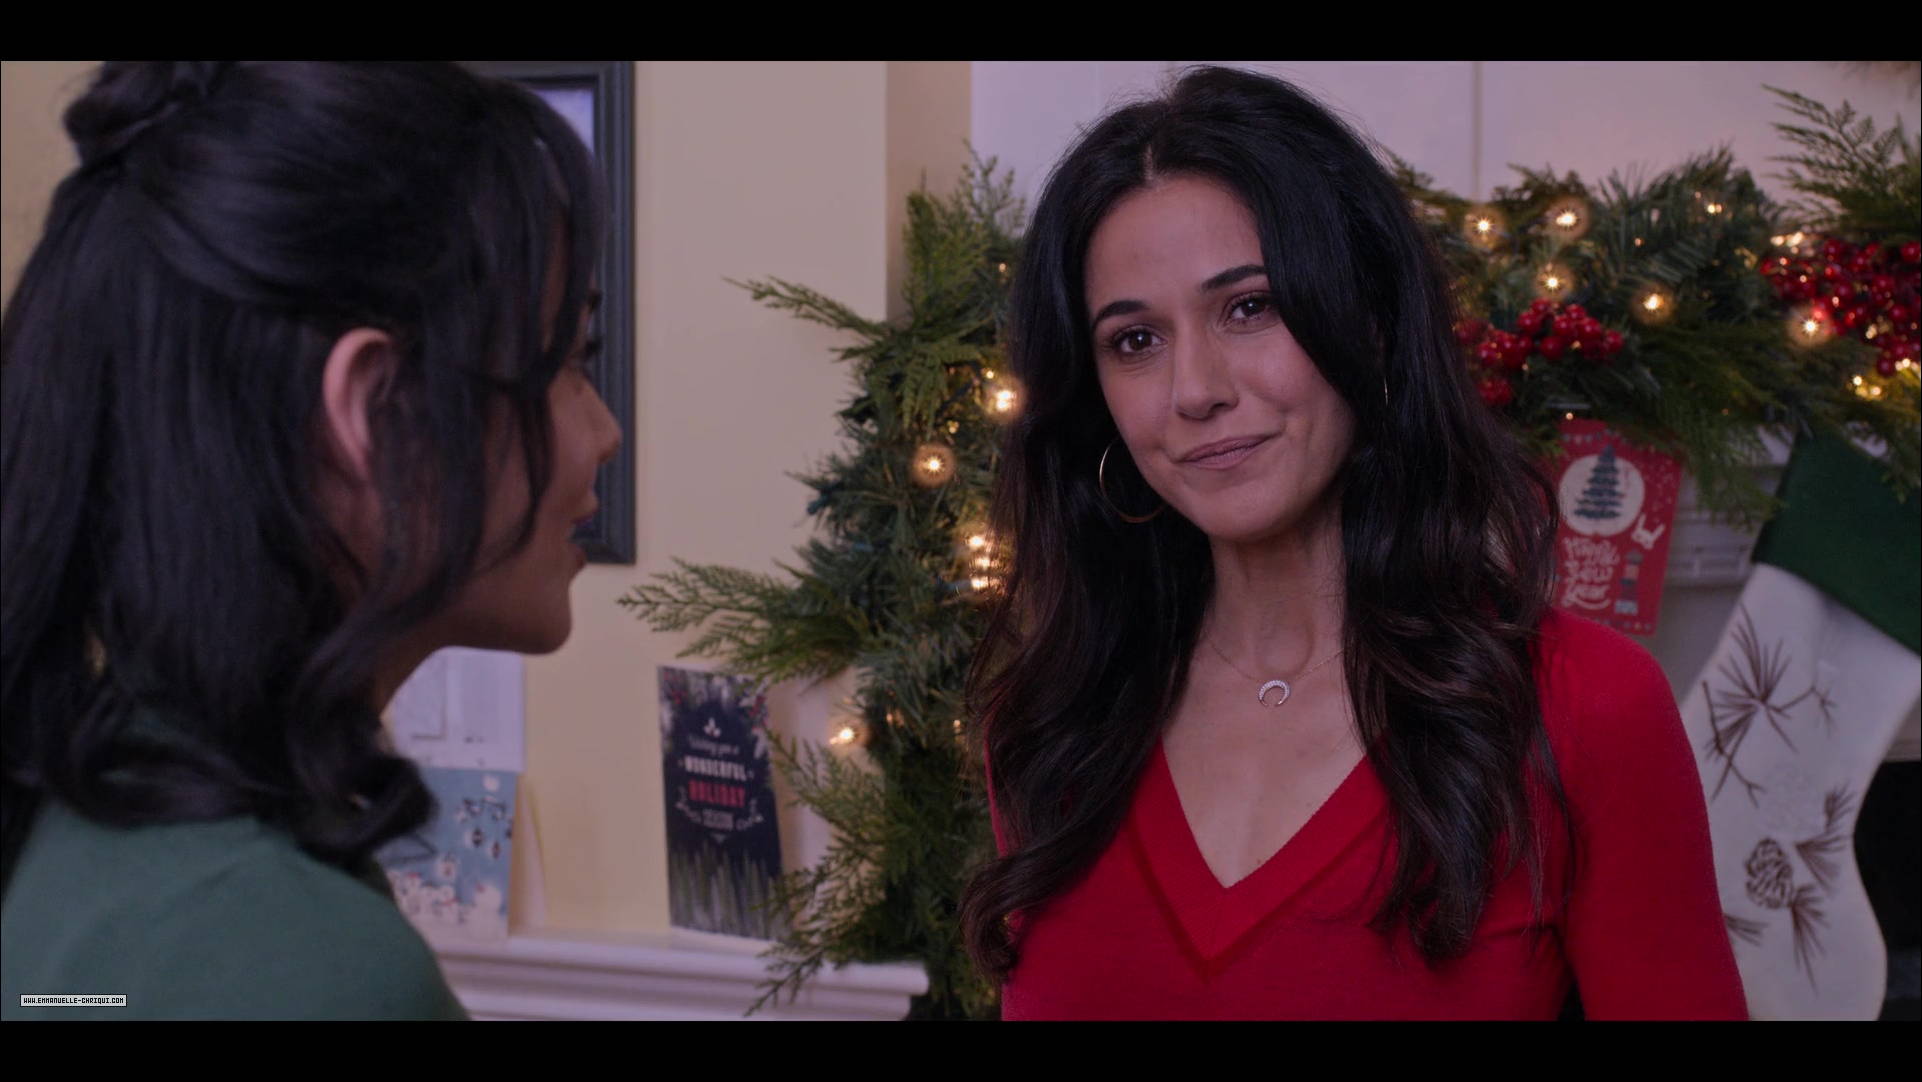 Emmanuelle Chriqui in "The Knight Before Christmas"